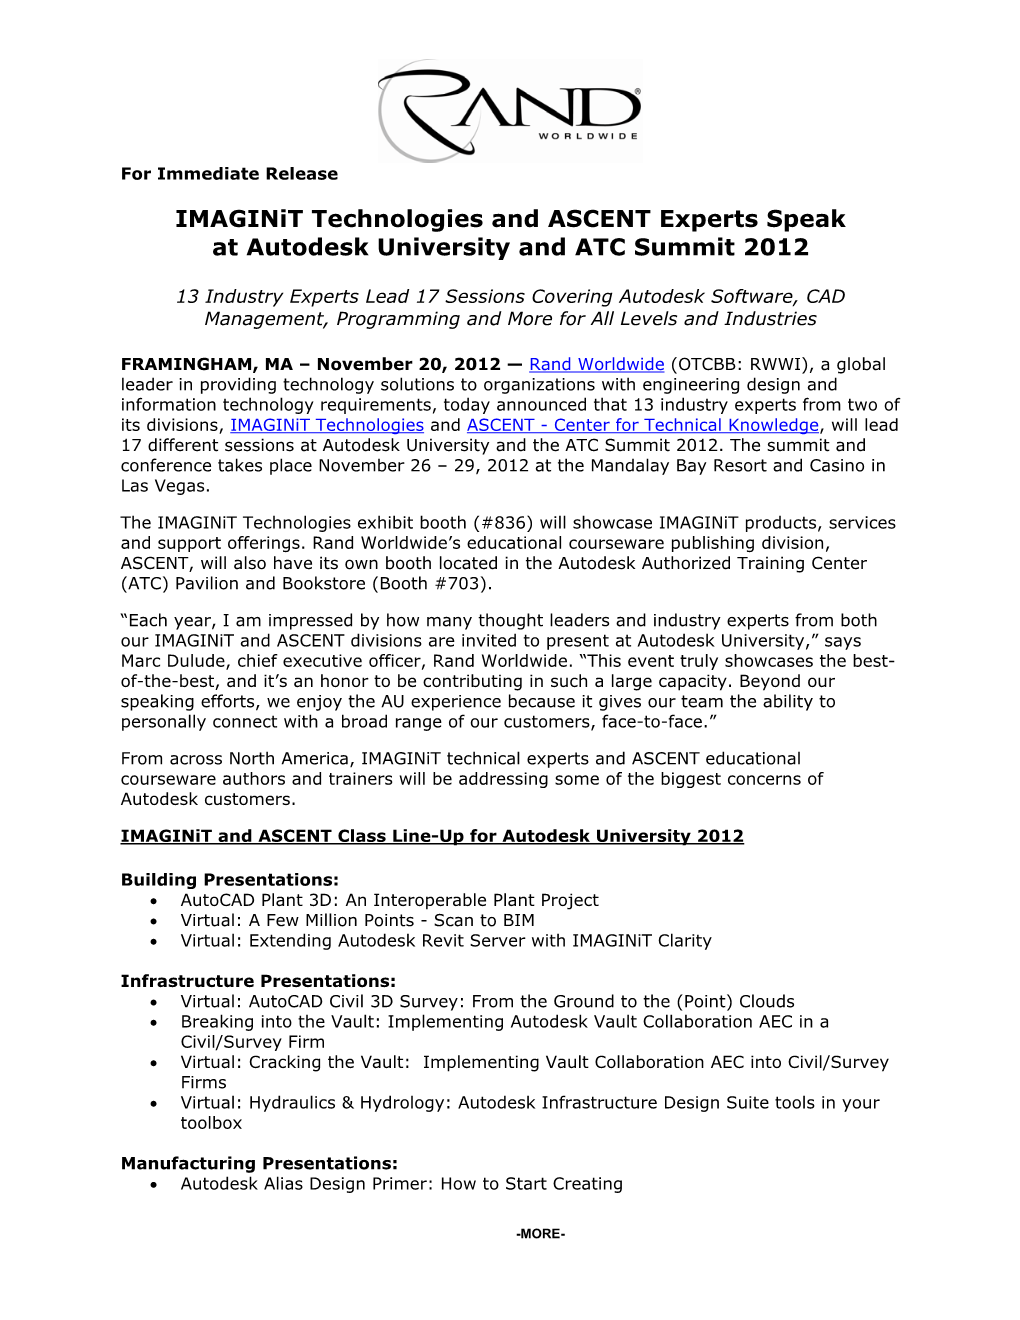 Imaginit Technologies and ASCENT Experts Speak at Autodesk University and ATC Summit 2012